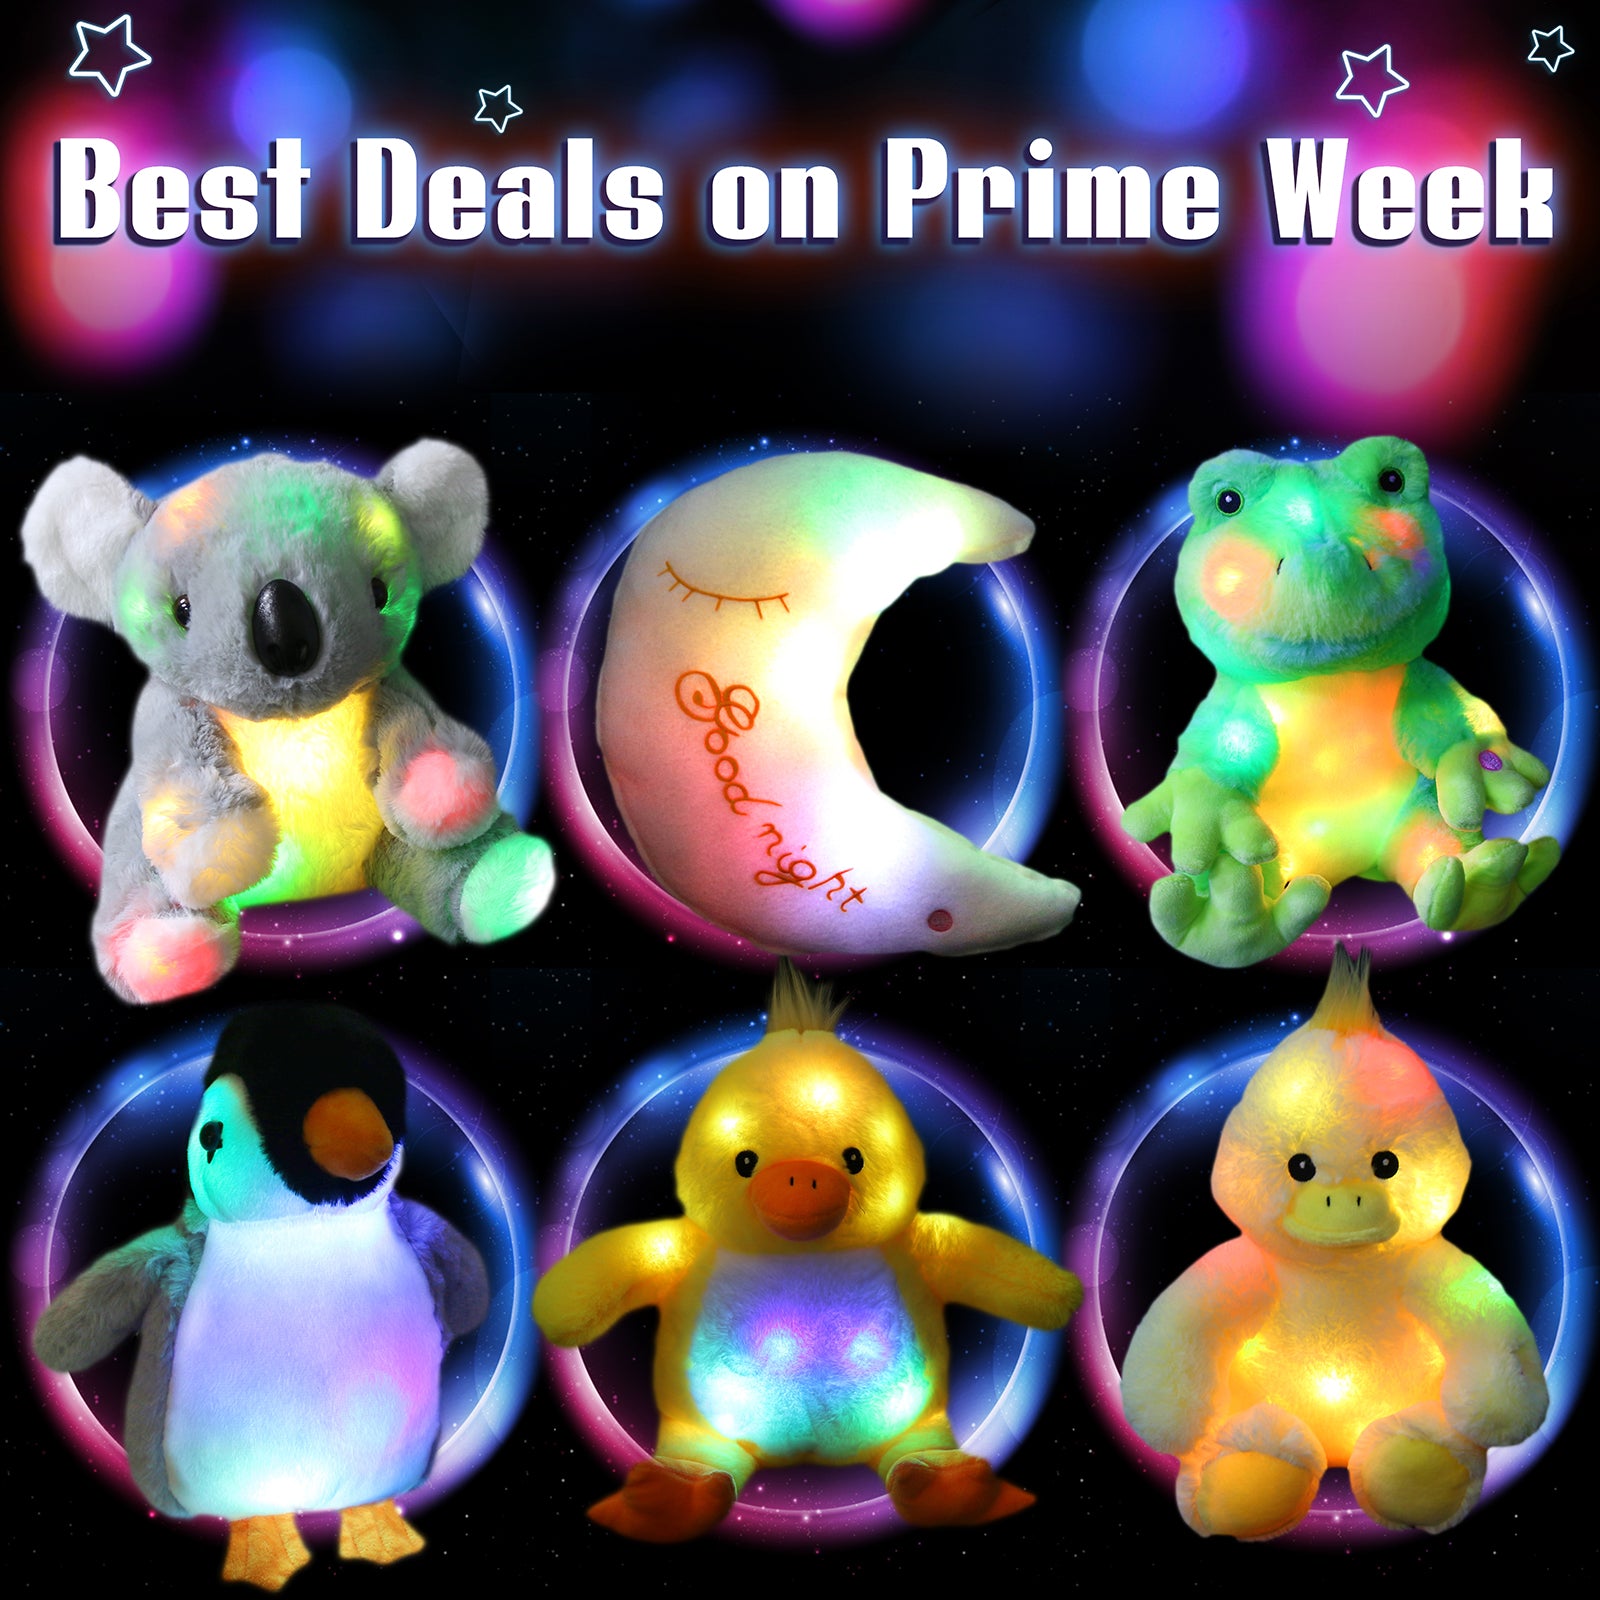 WEWILL Creative Twinkle Star Glowing LED Night Light Plush Pillows - Glow Guards